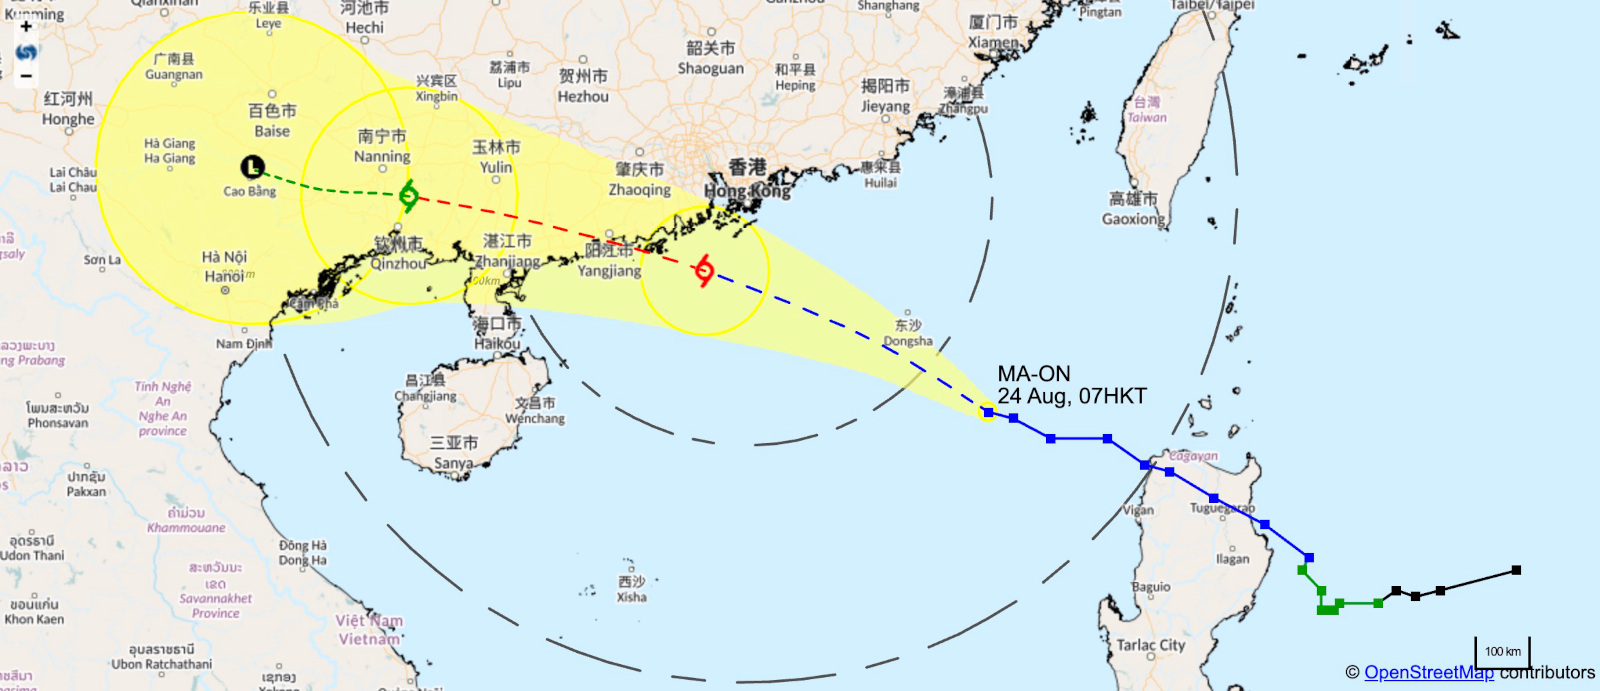 Location of MA-ON at 7AM on August 24 (Hong Kong Observatory)